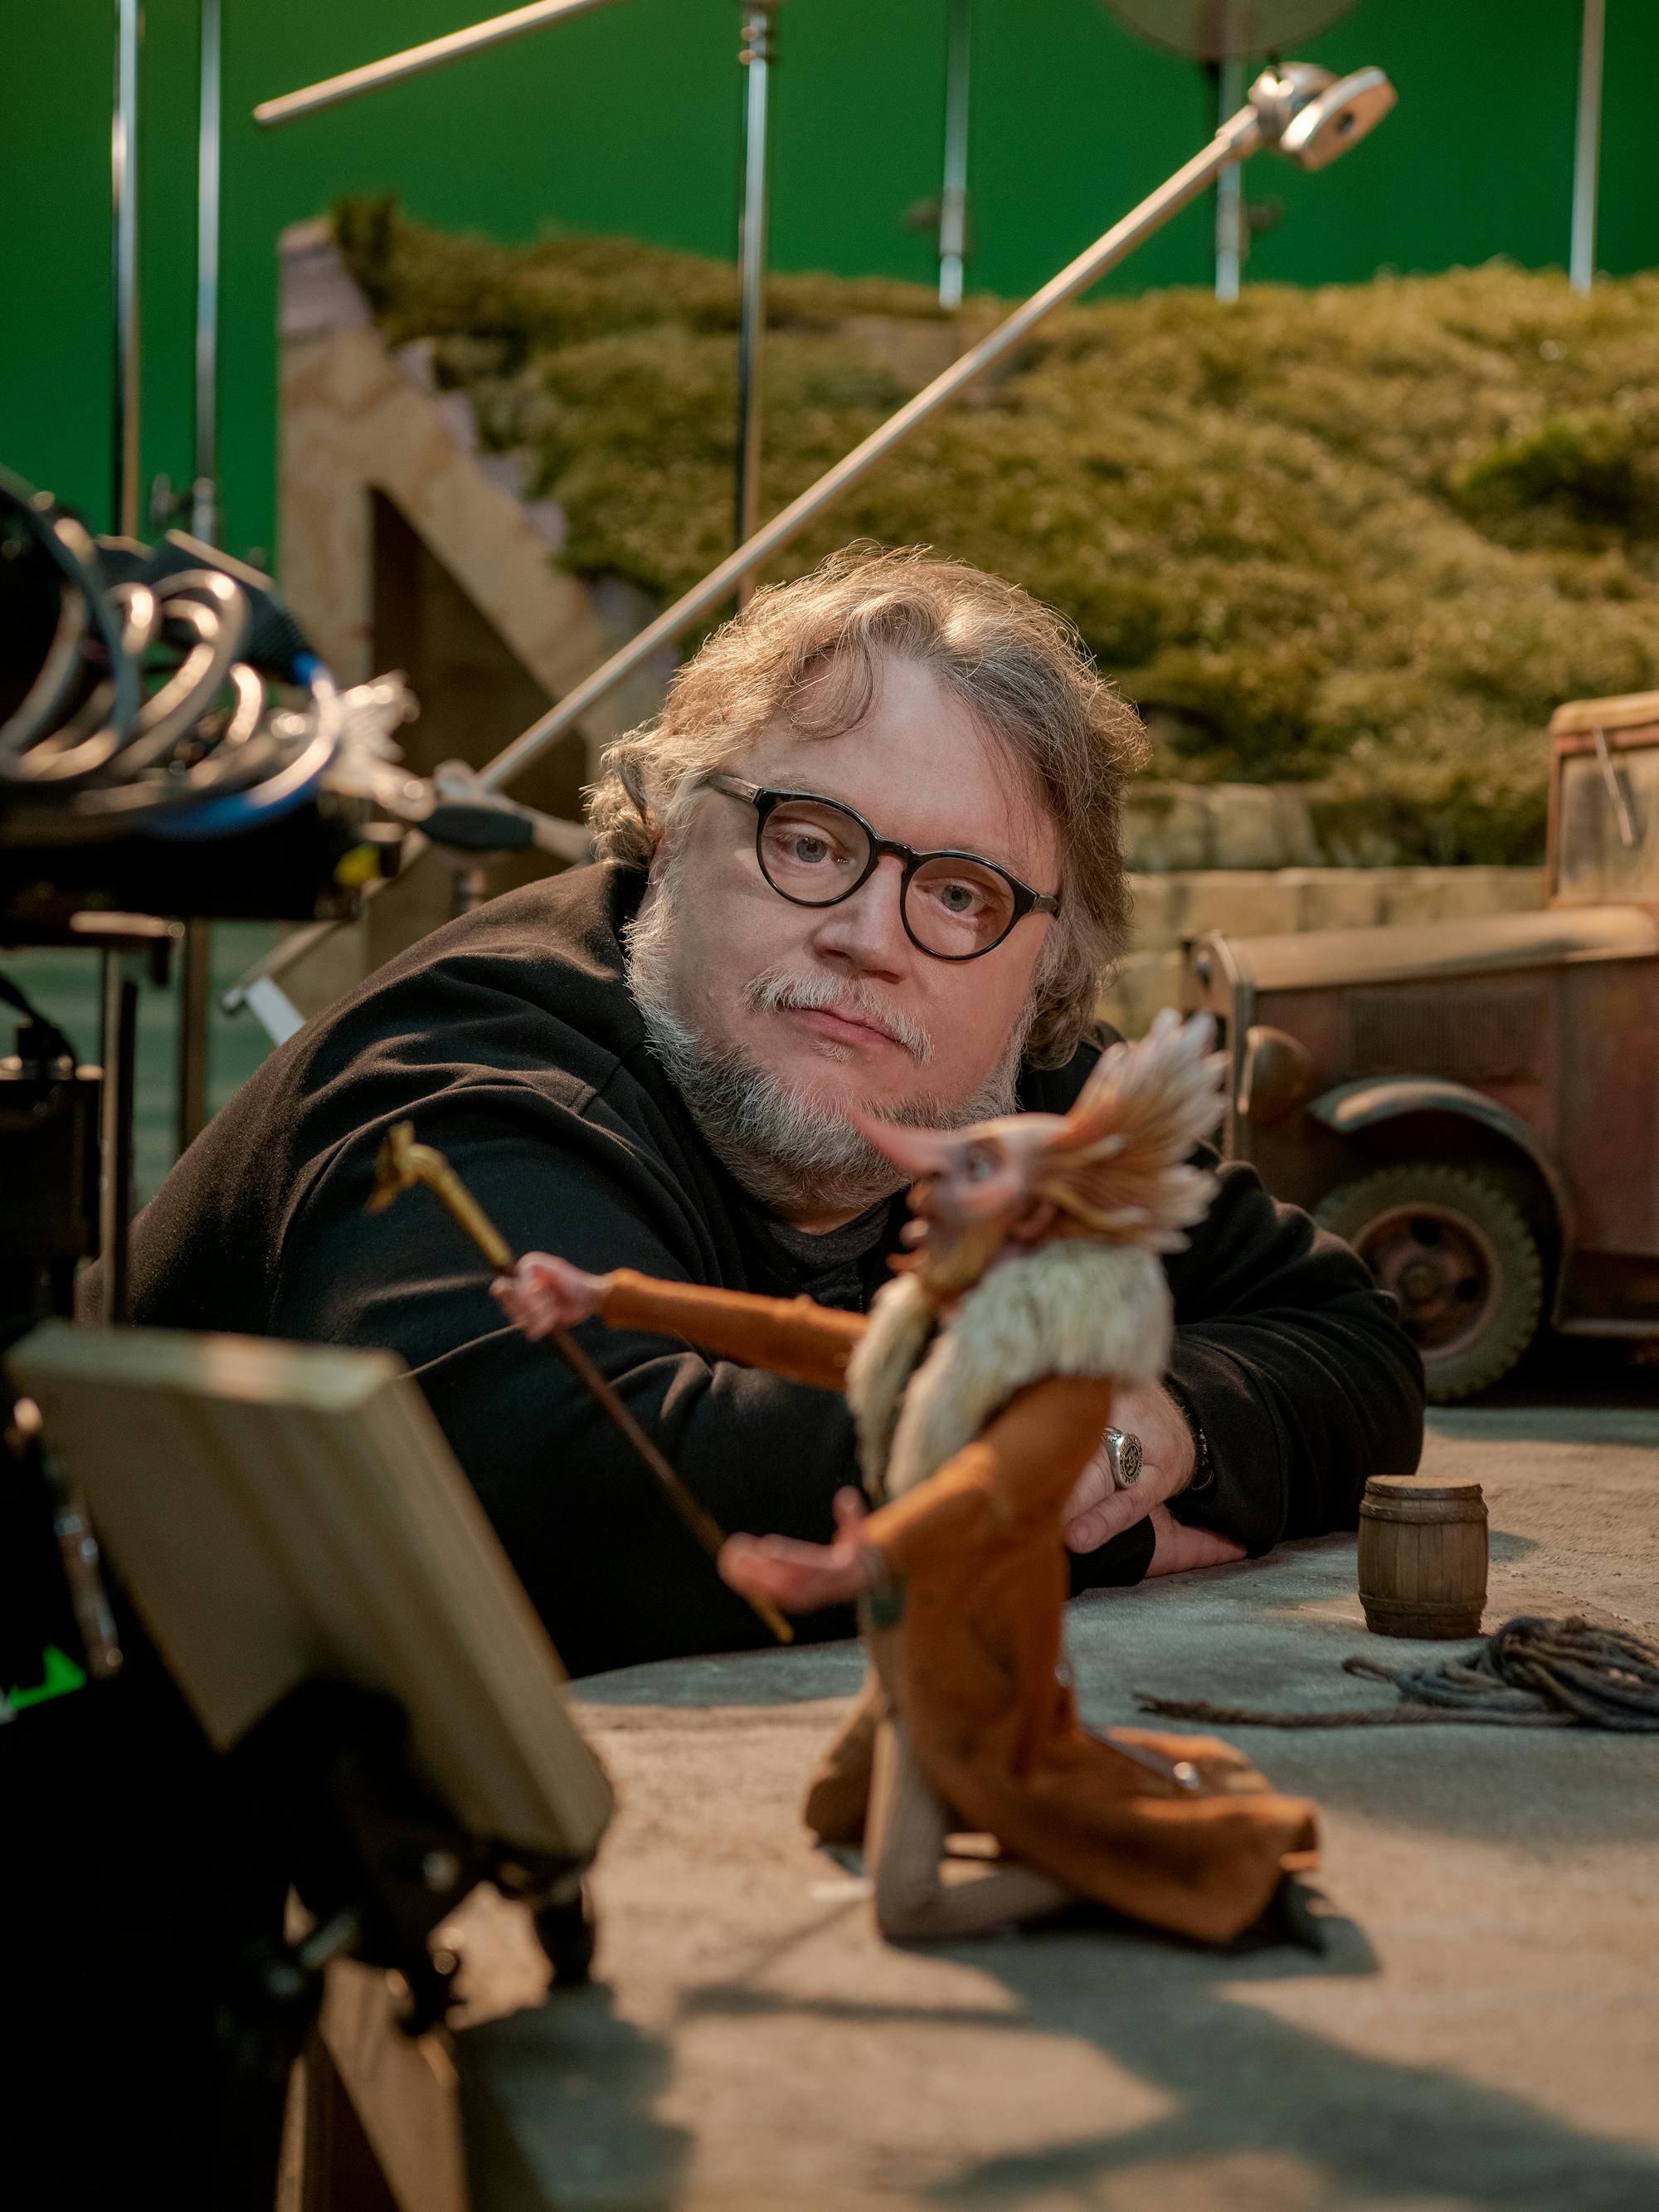 Guillermo del Toro examines the Count Volpe (Christoph Waltz) puppet with a pensive expression. Behind them is a grassy set.